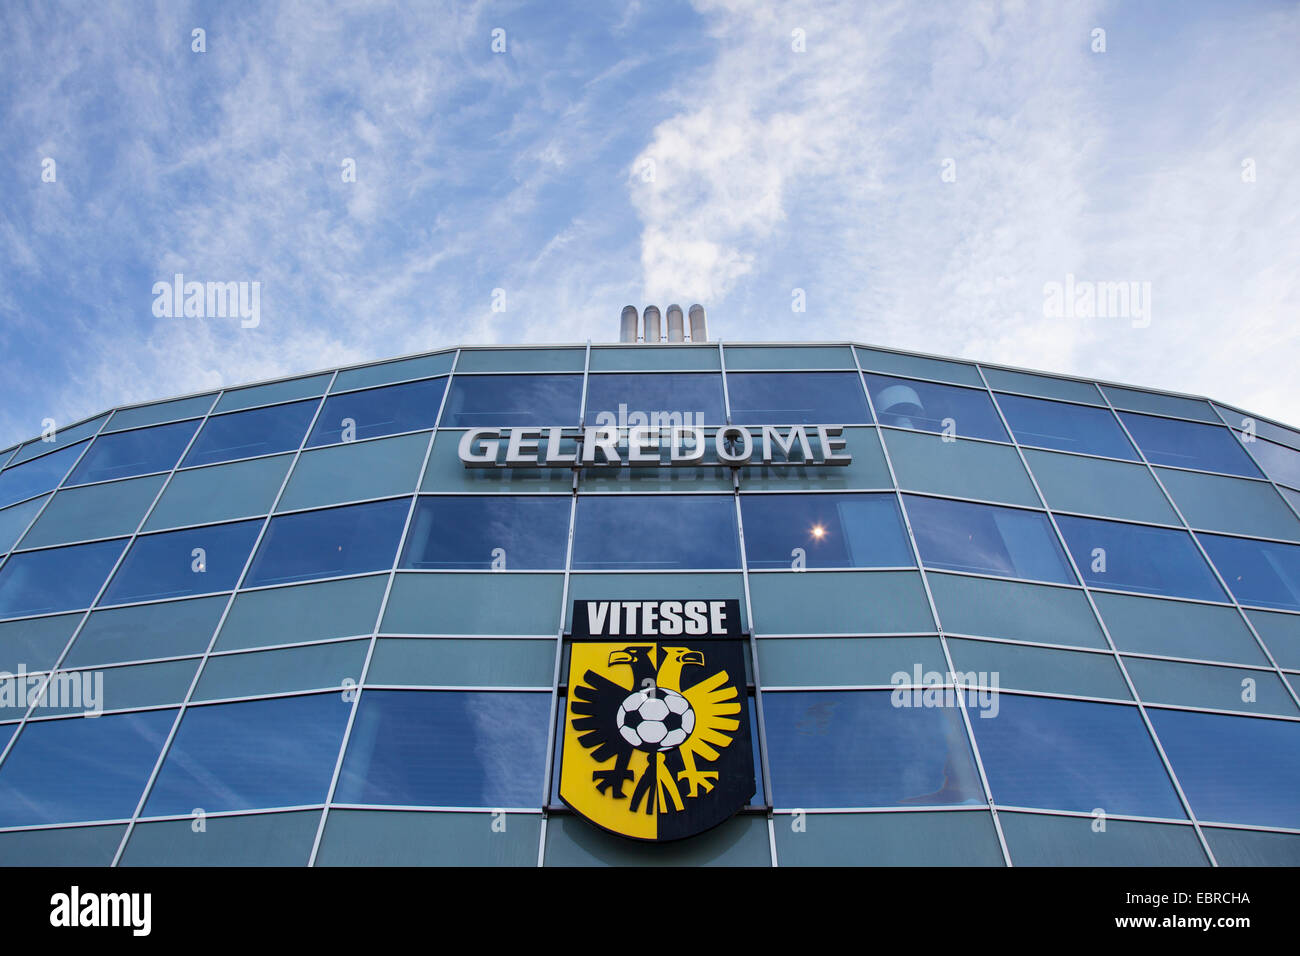 facade of soccer stadium gelredome in the dutch town of arnhem with vitesse logo Stock Photo